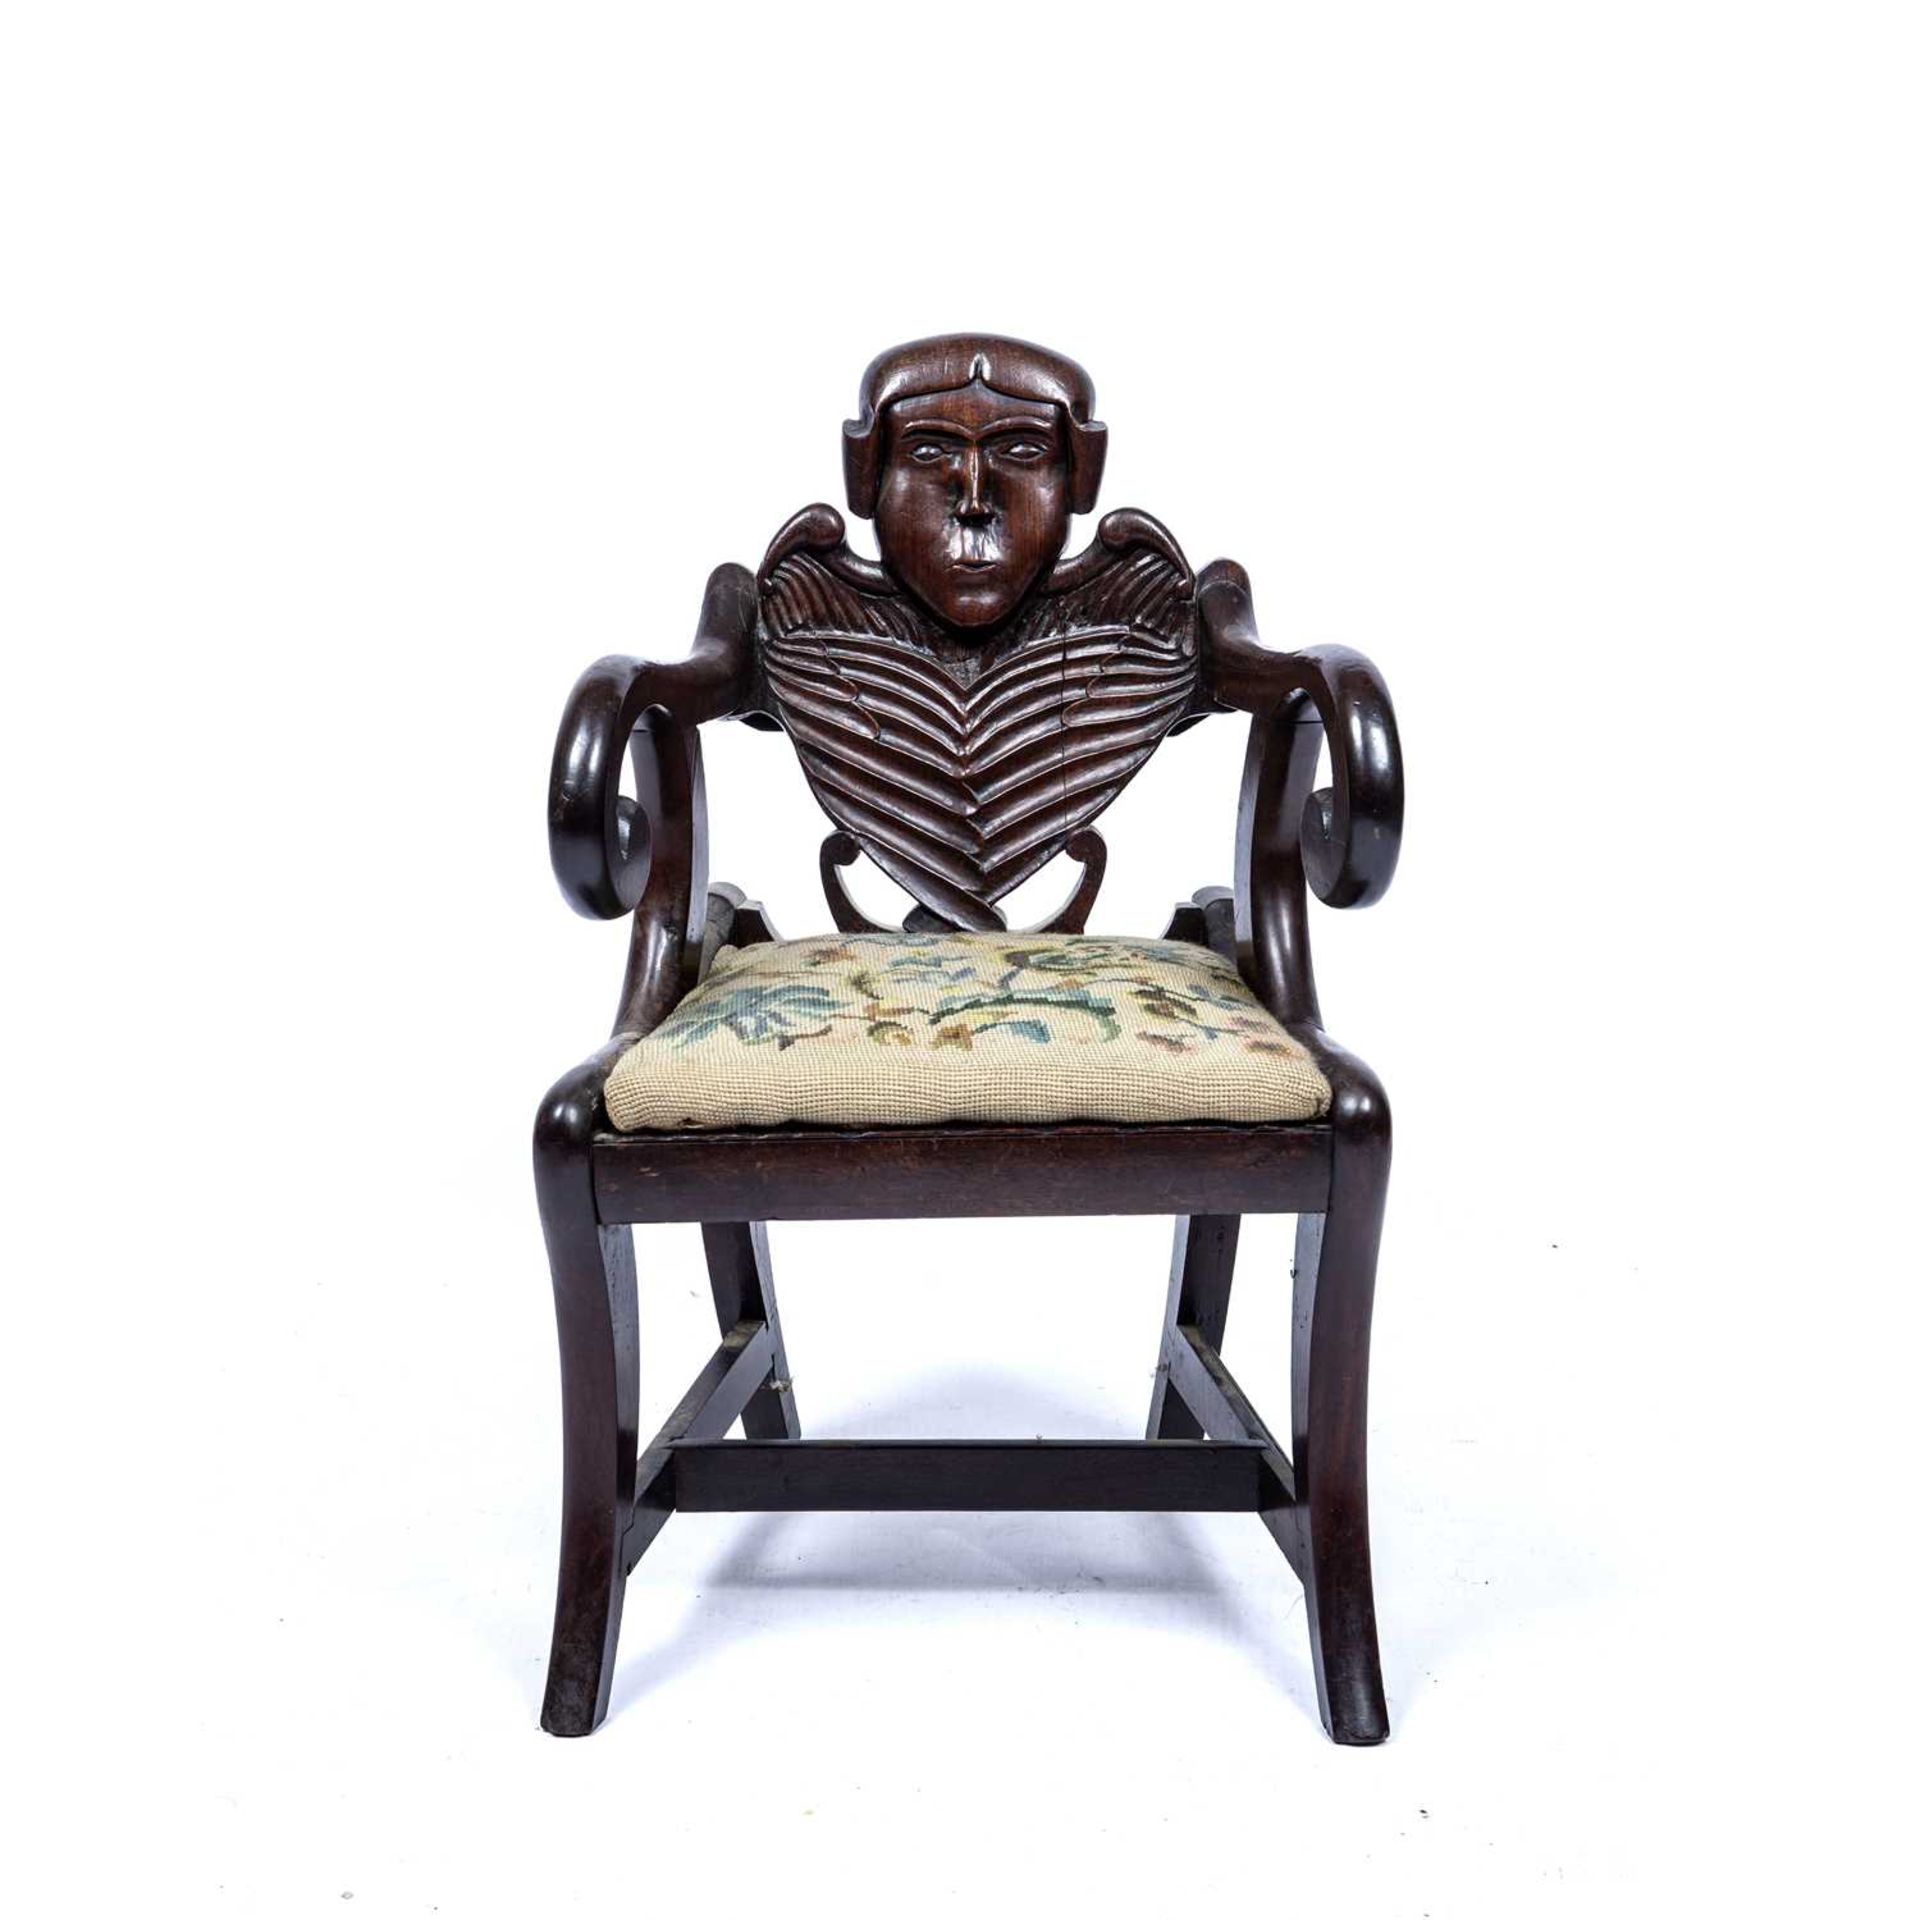 Carved childs chair with a skeleton back on sabre legs with a drop in seat, 64 cm high x 39cm